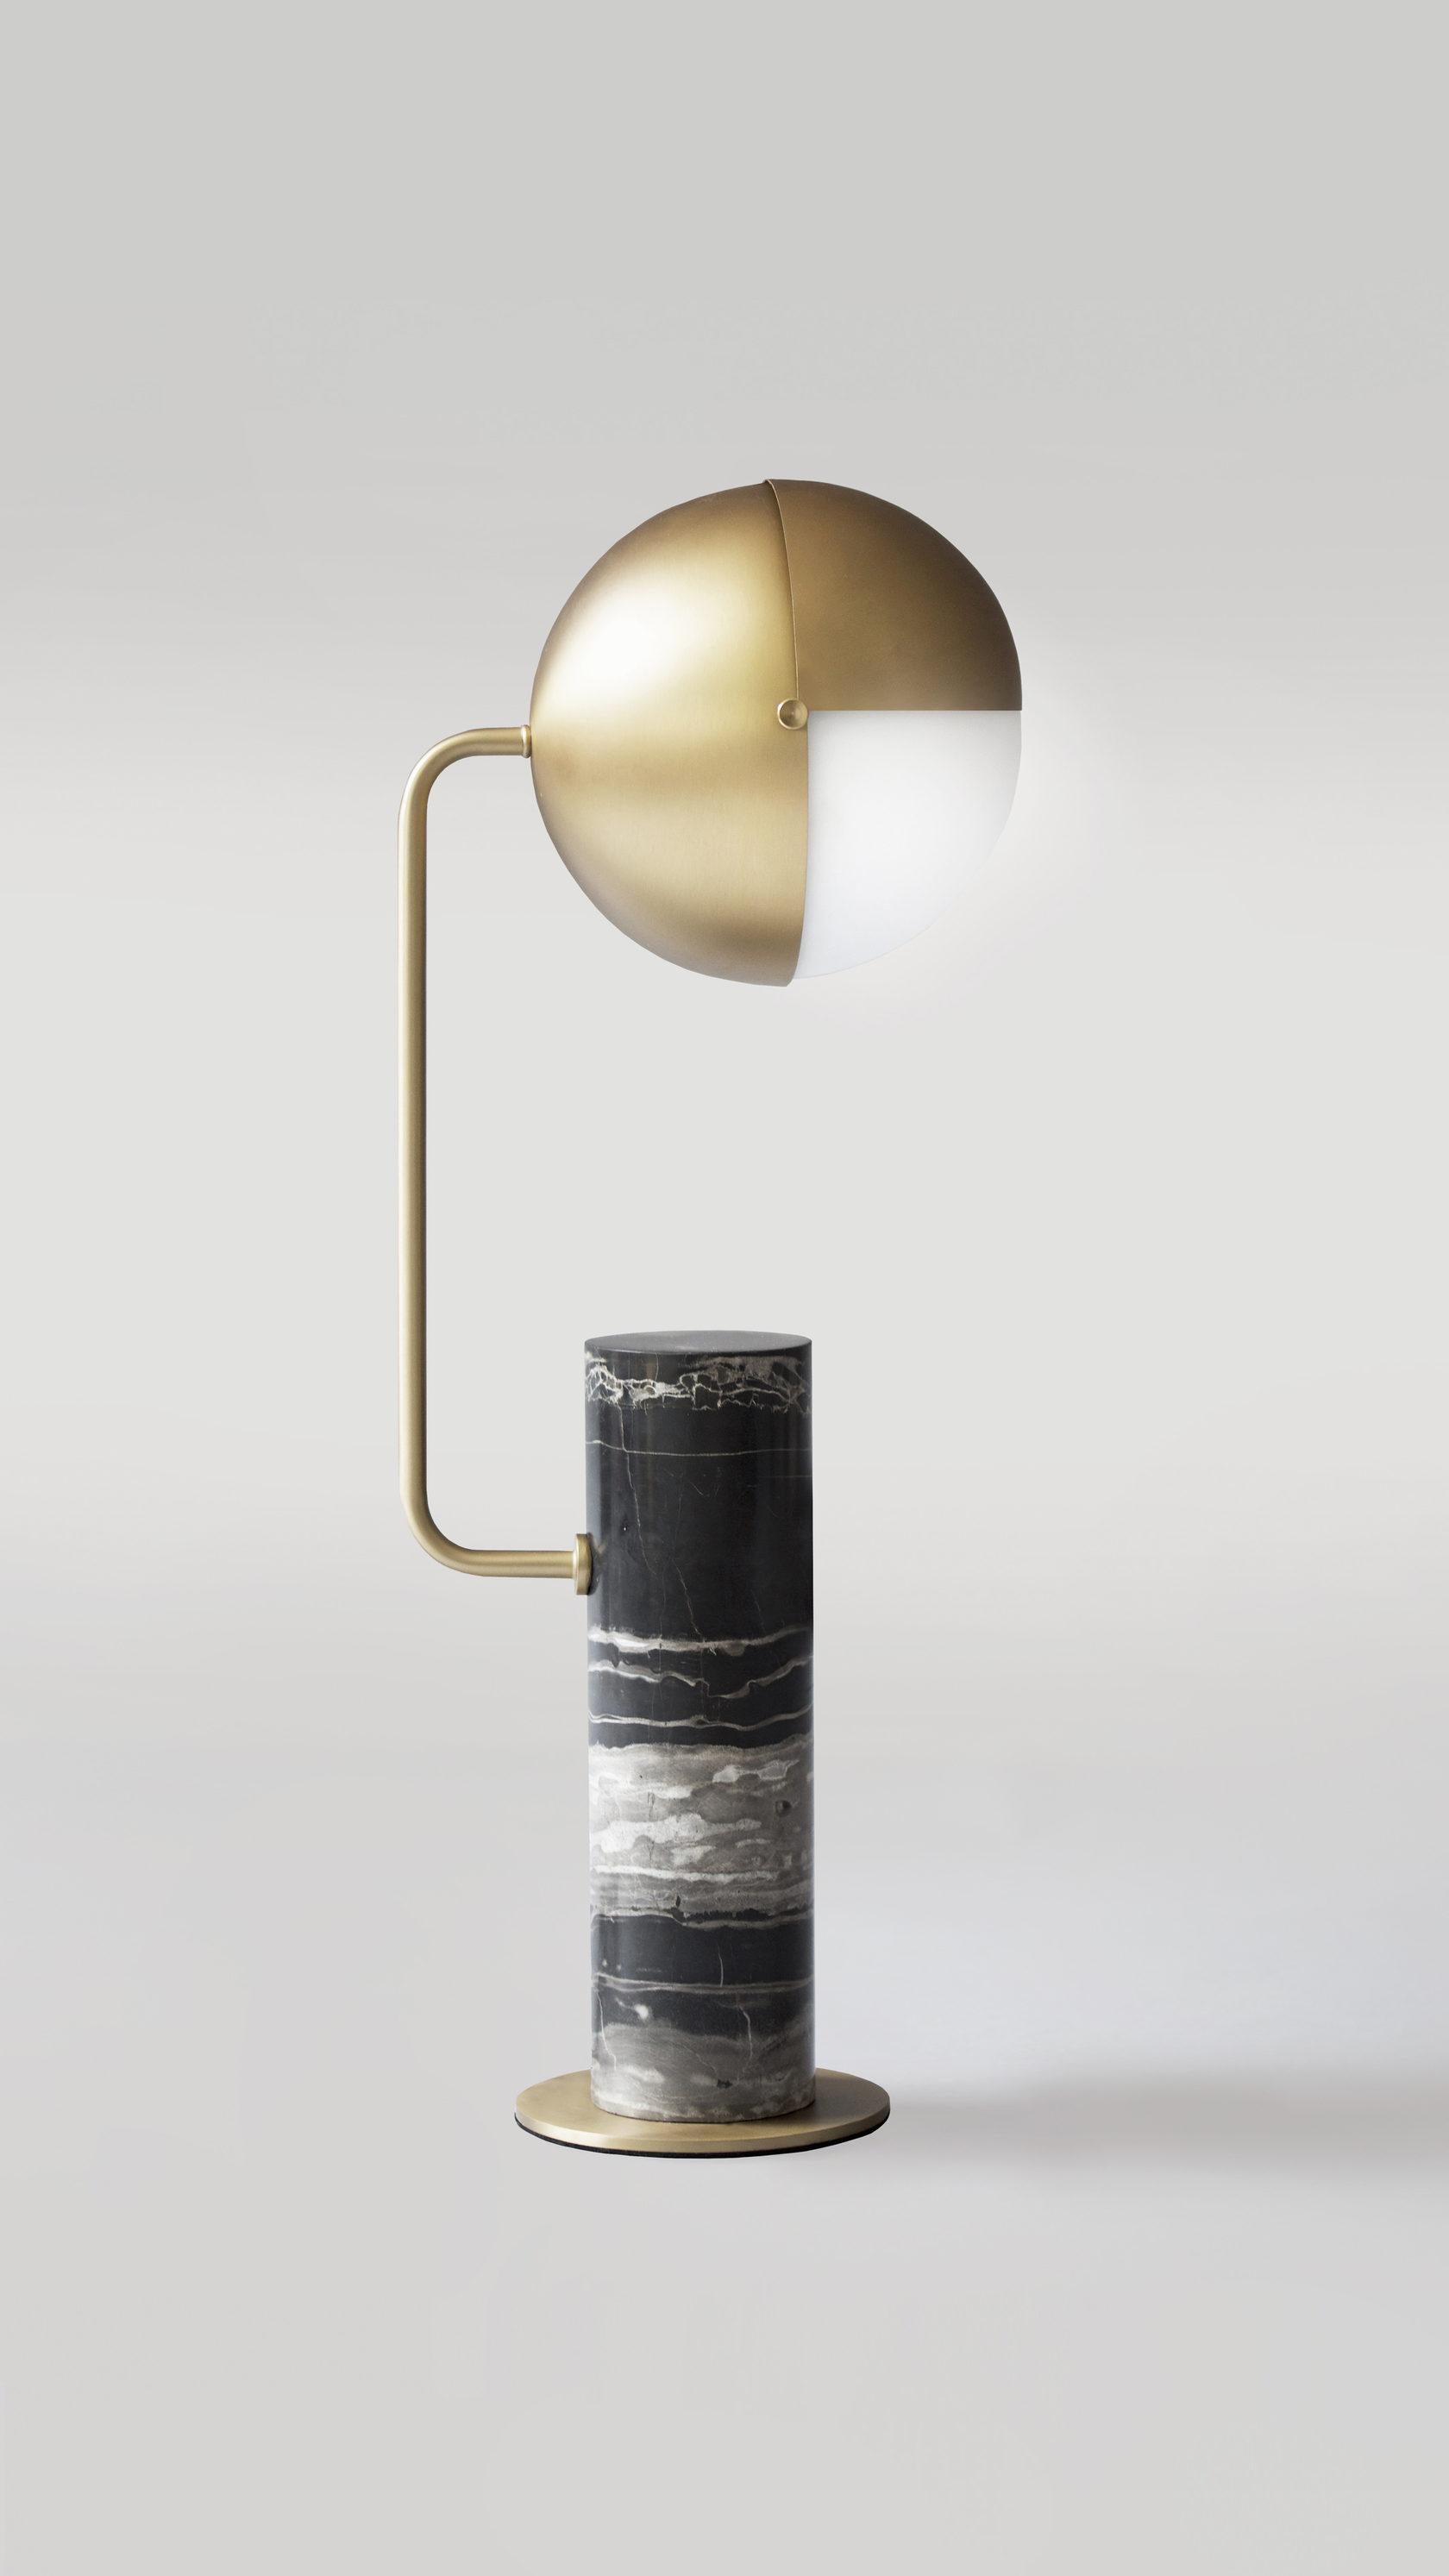 Set of 2 Brass Another Table Lamps by Square in Circle
Dimensions: H 60 x W 25.6 x 25.6 cm
Materials: Brushed brass finish, frosted glass, black marble base 

A marble base table lamp with a rounded projecting arm to one side, topped with an unusual